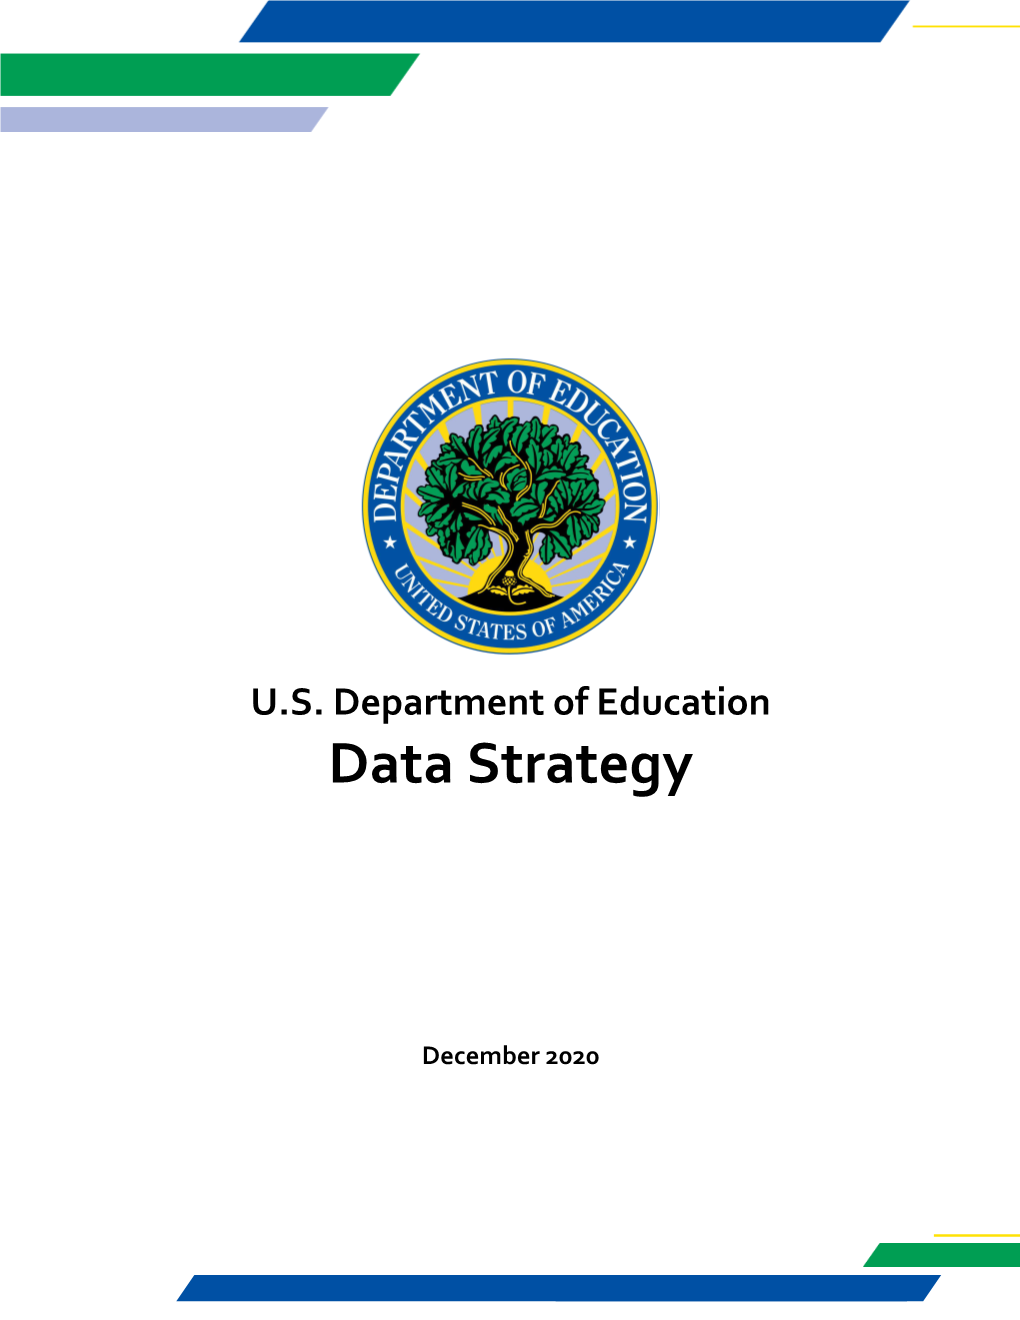 U.S. Department of Education Data Strategy December 2020